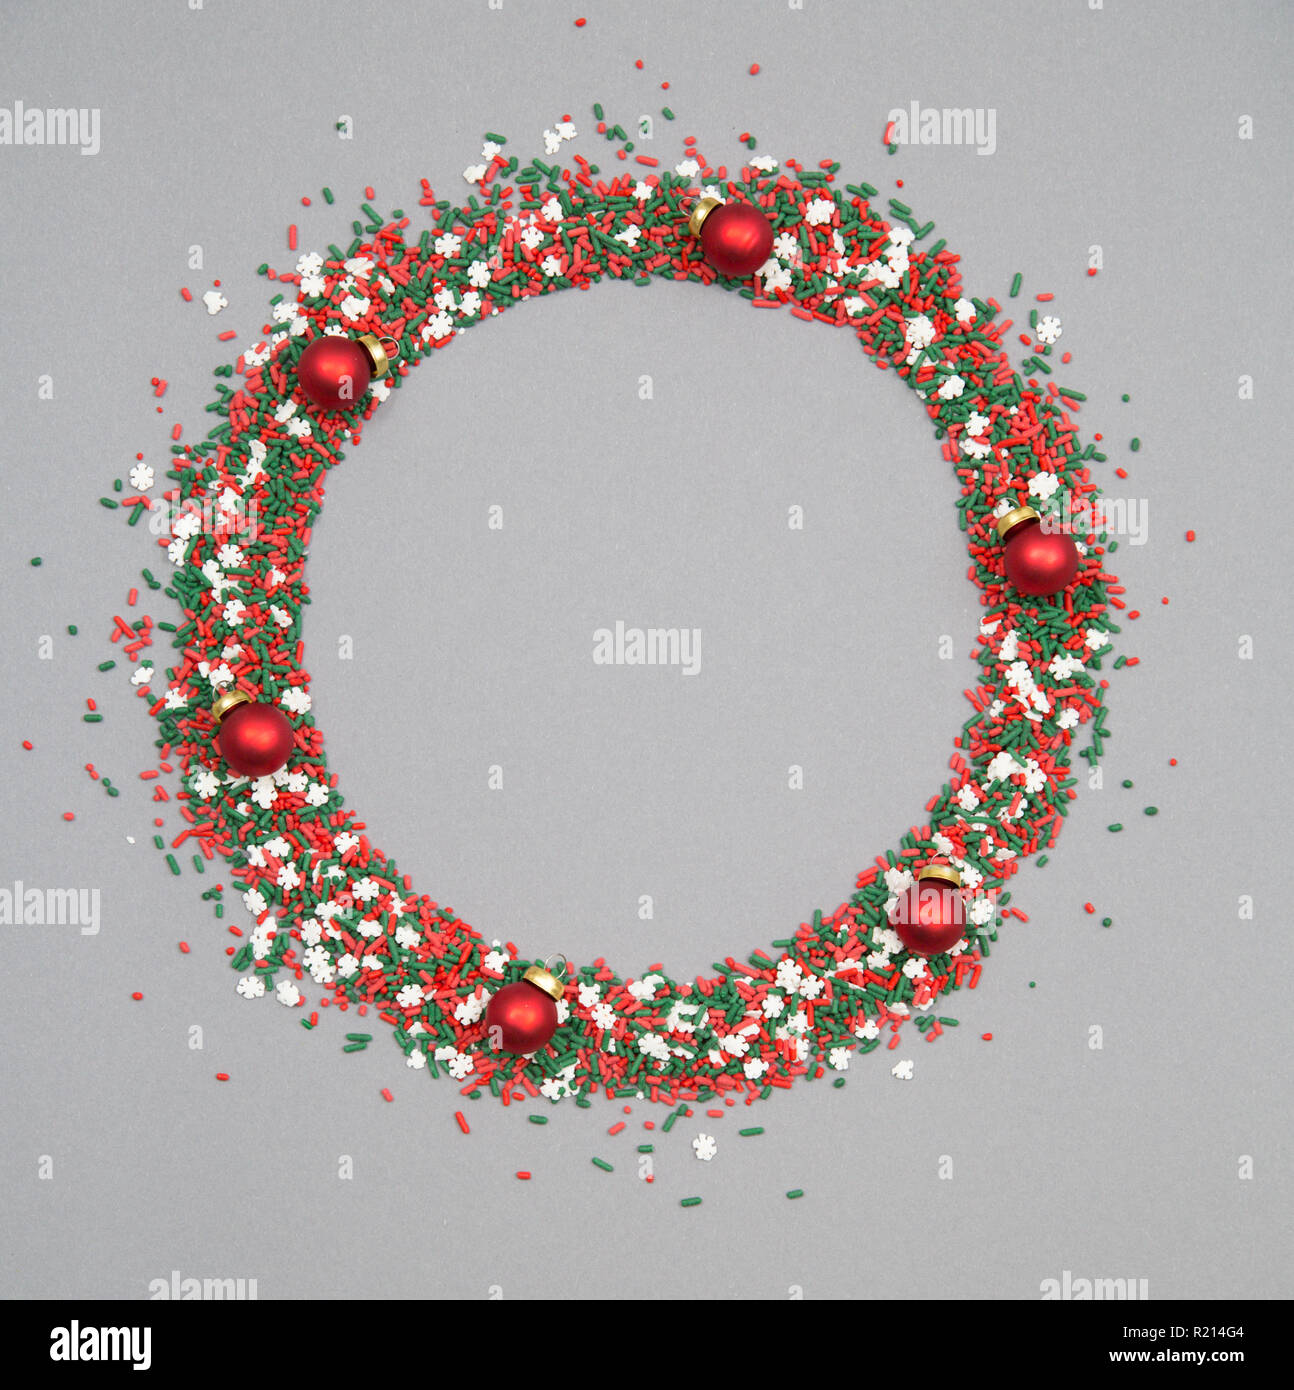 Christmas wreath made of red and green sprinkles with christmas ornaments on a grey background Stock Photo